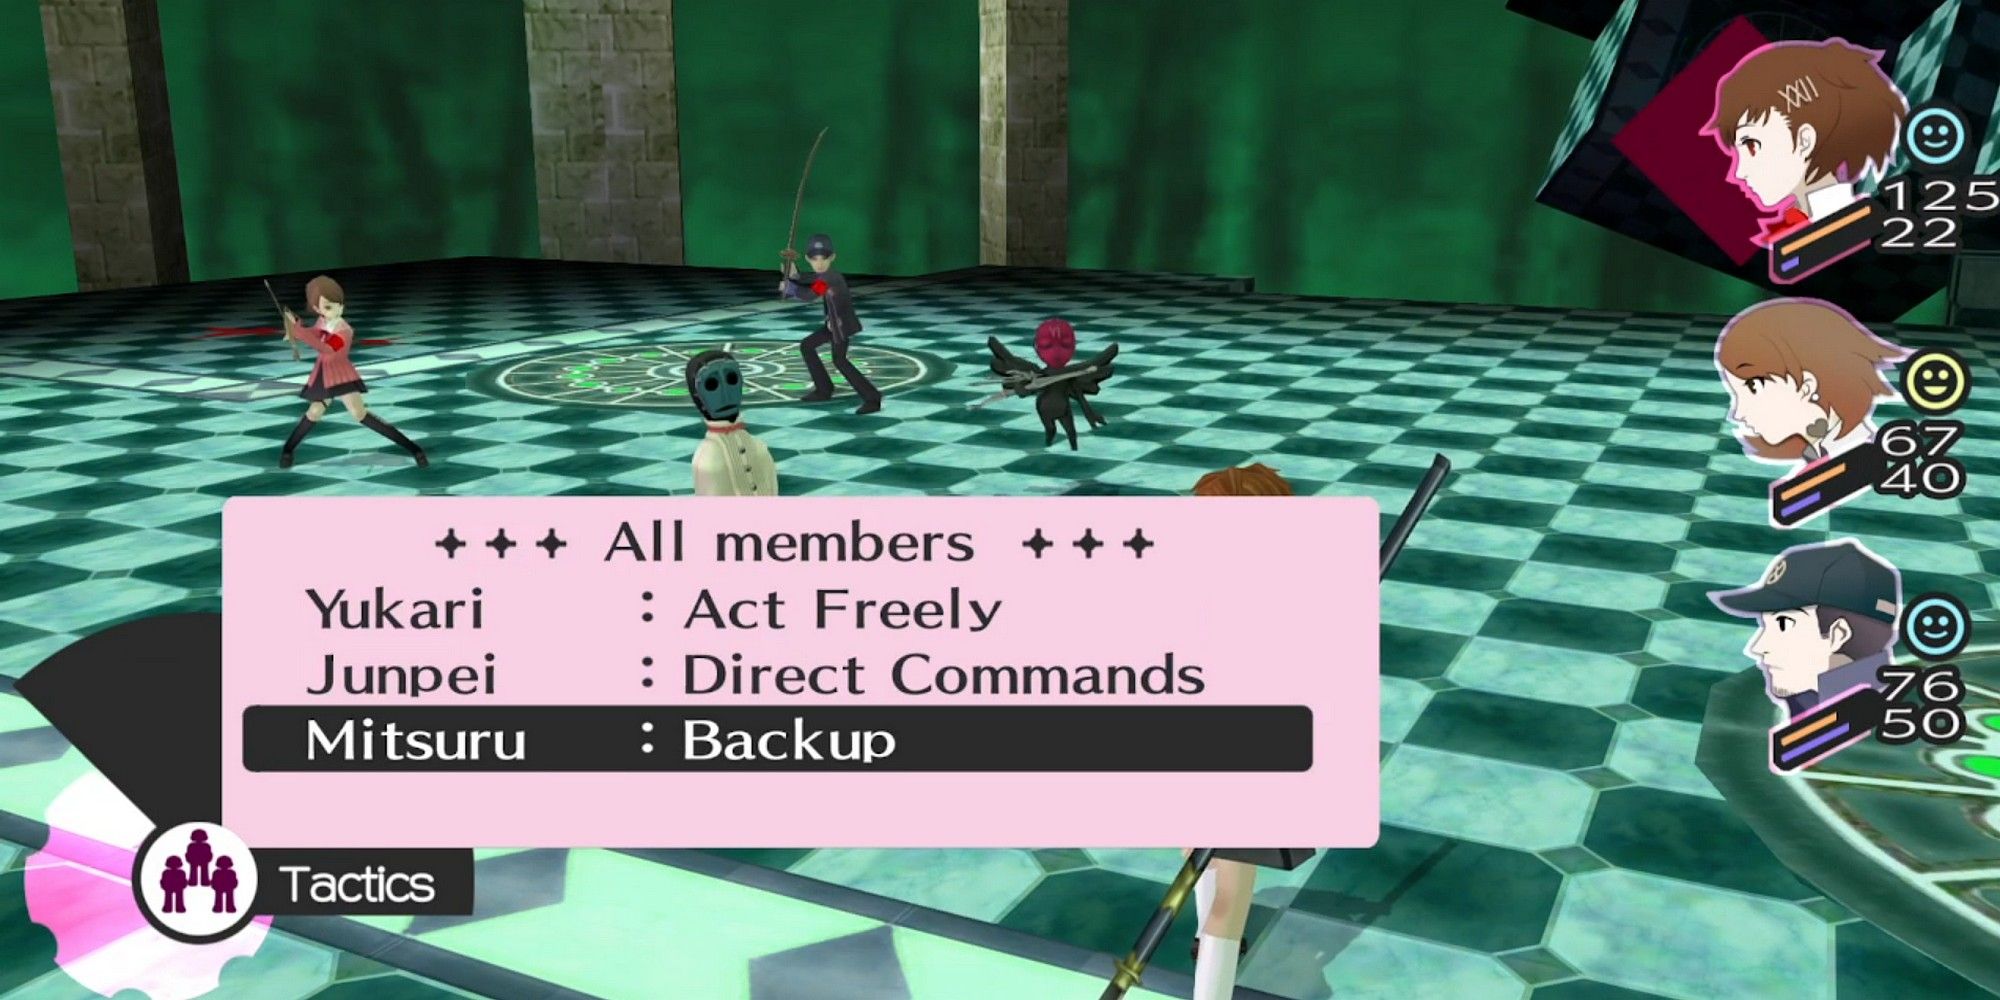 the tactics menu in persona 3 portable showing different command options for party members during battle